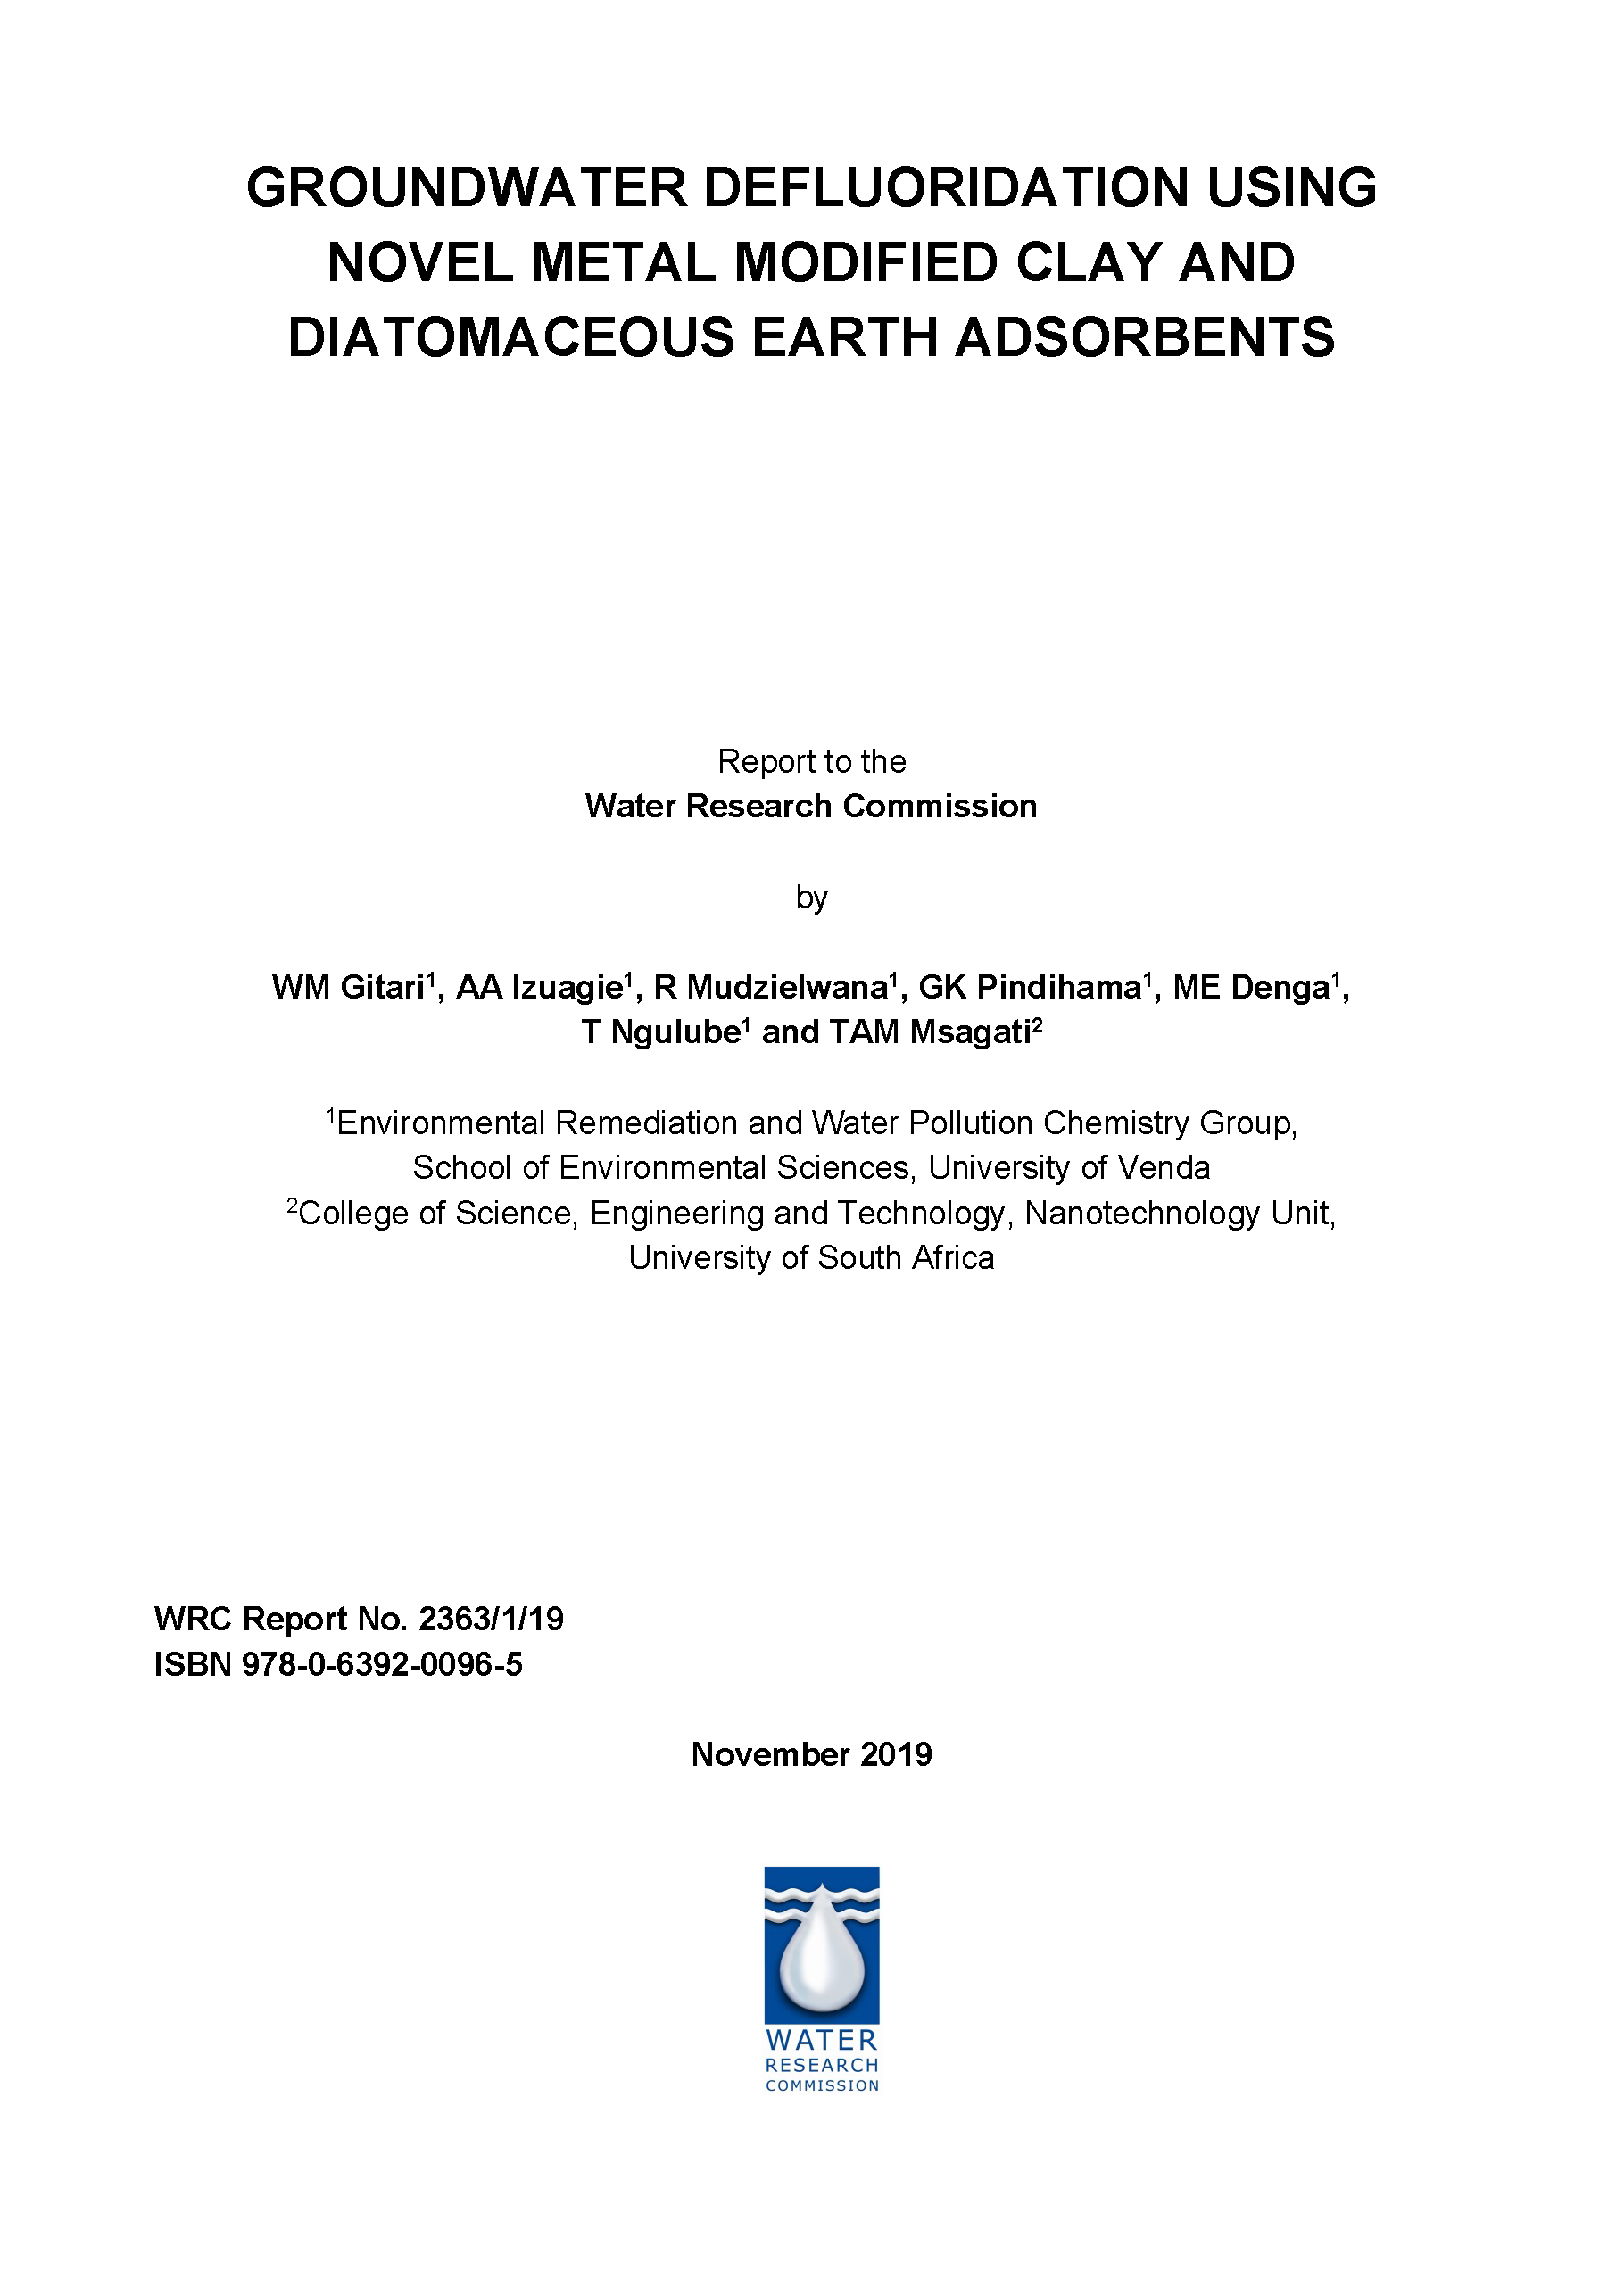 Cover-page for Groundwater Defluoridation Using Novel Metal Modified Clay and Diatomaceous Earth Adsorbents